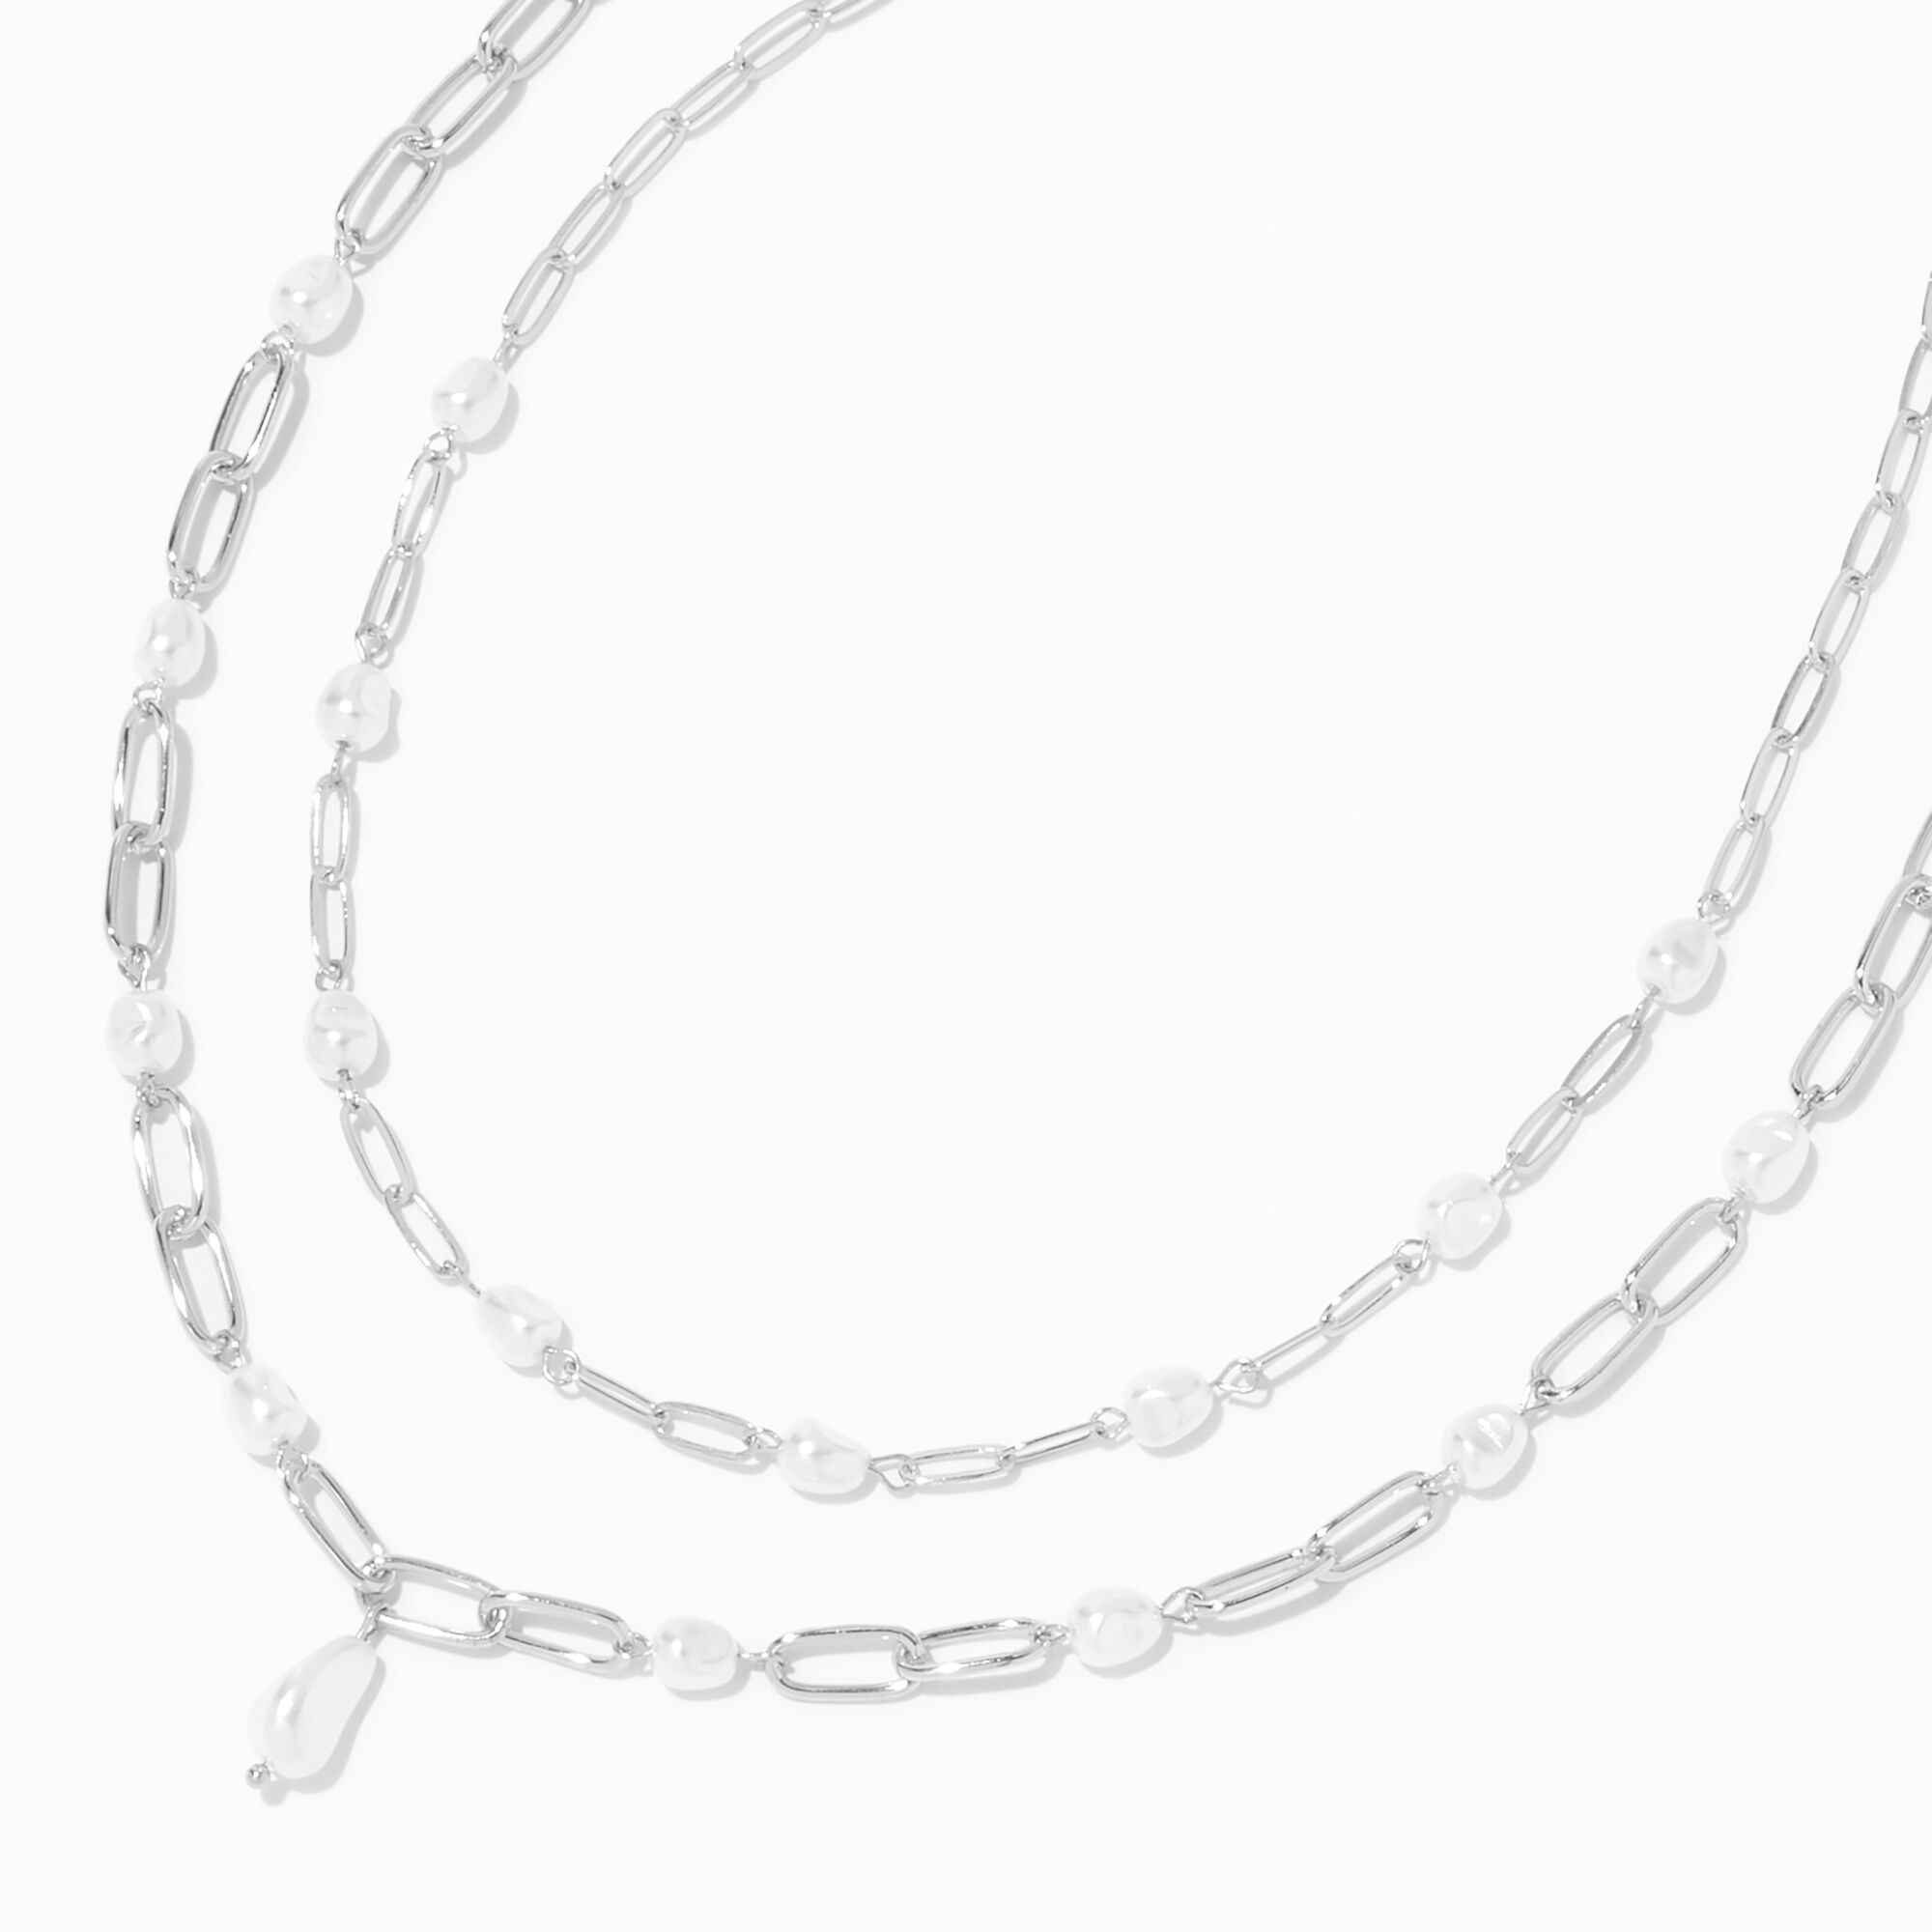 View Claires Tone Pearl Paperclip Necklace Set 2 Pack Silver information